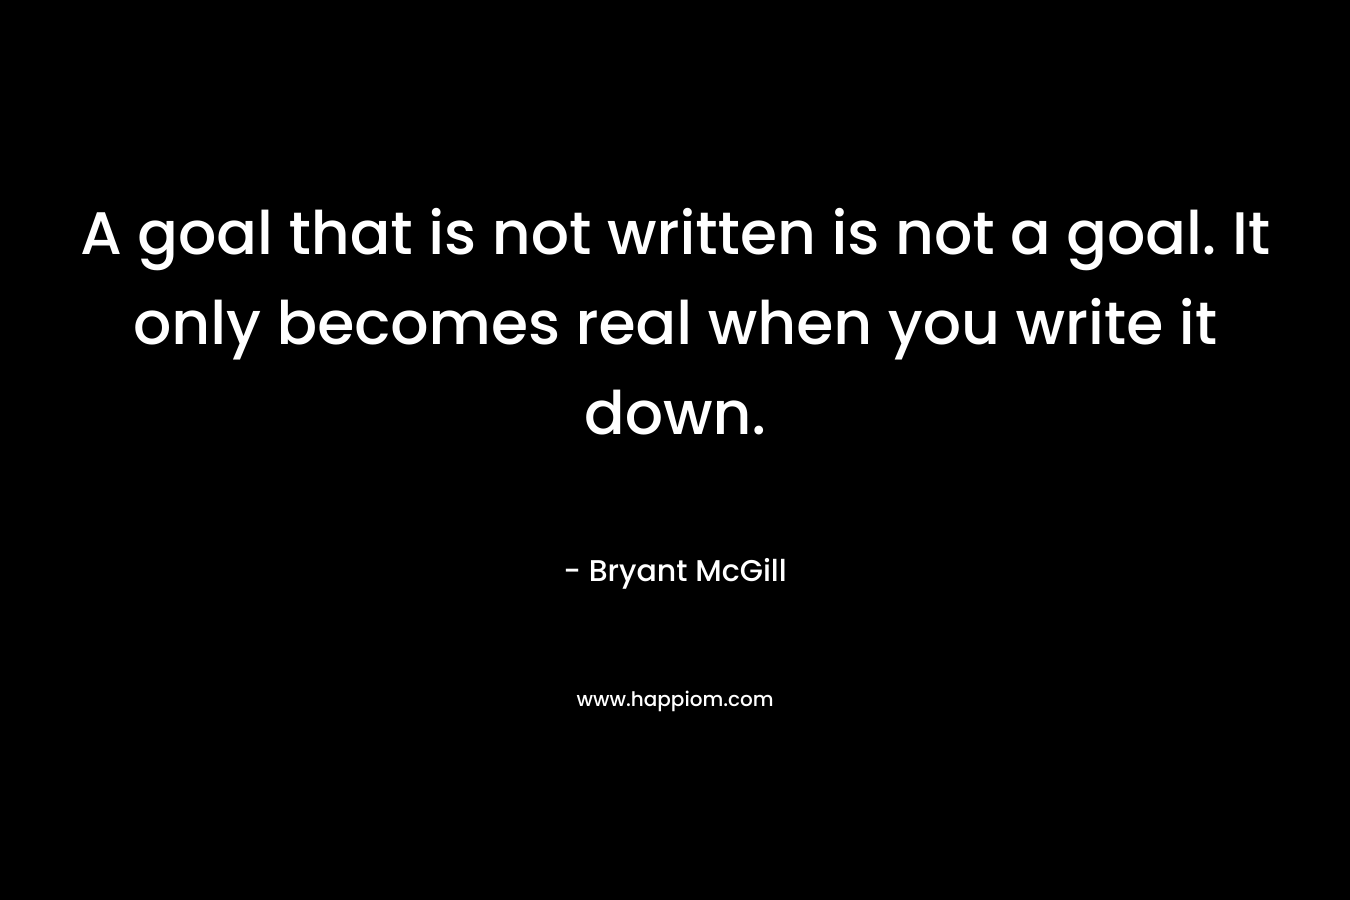 A goal that is not written is not a goal. It only becomes real when you write it down.